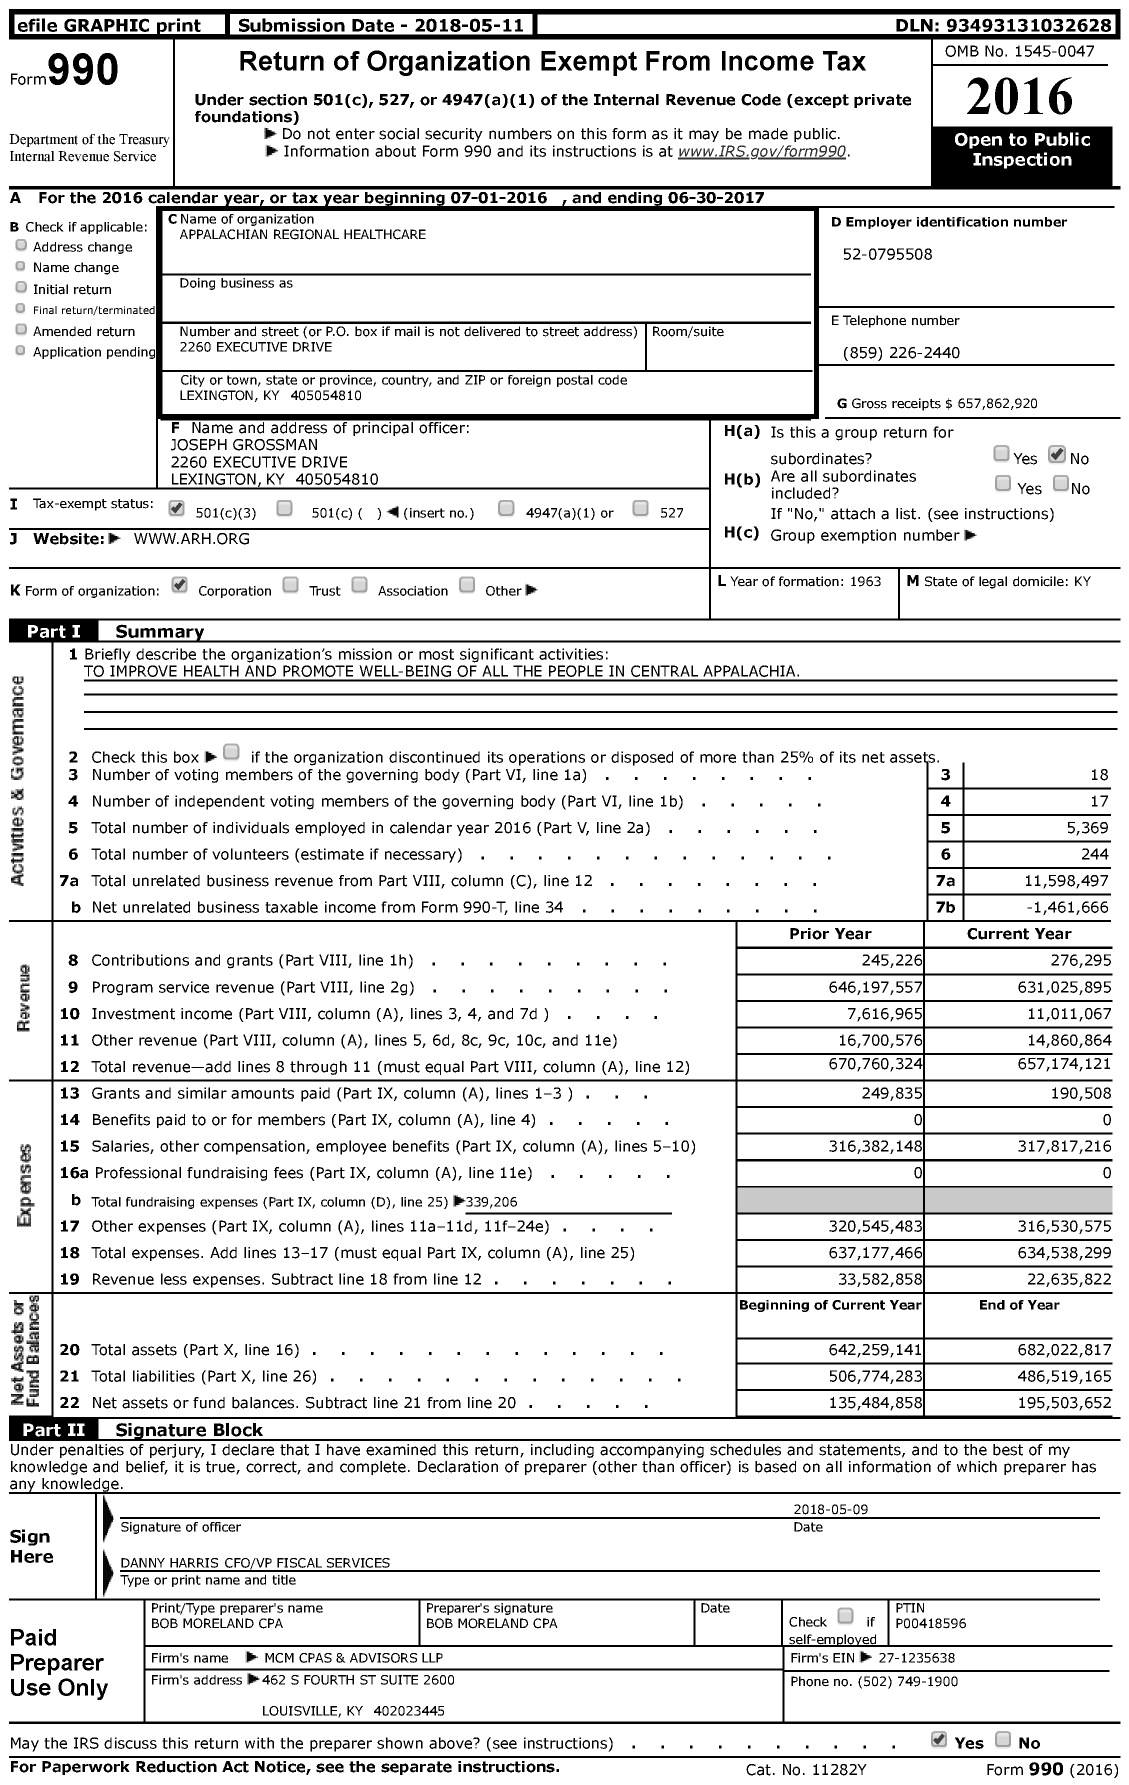 Image of first page of 2016 Form 990 for Appalachian Regional Healthcare (ARH)